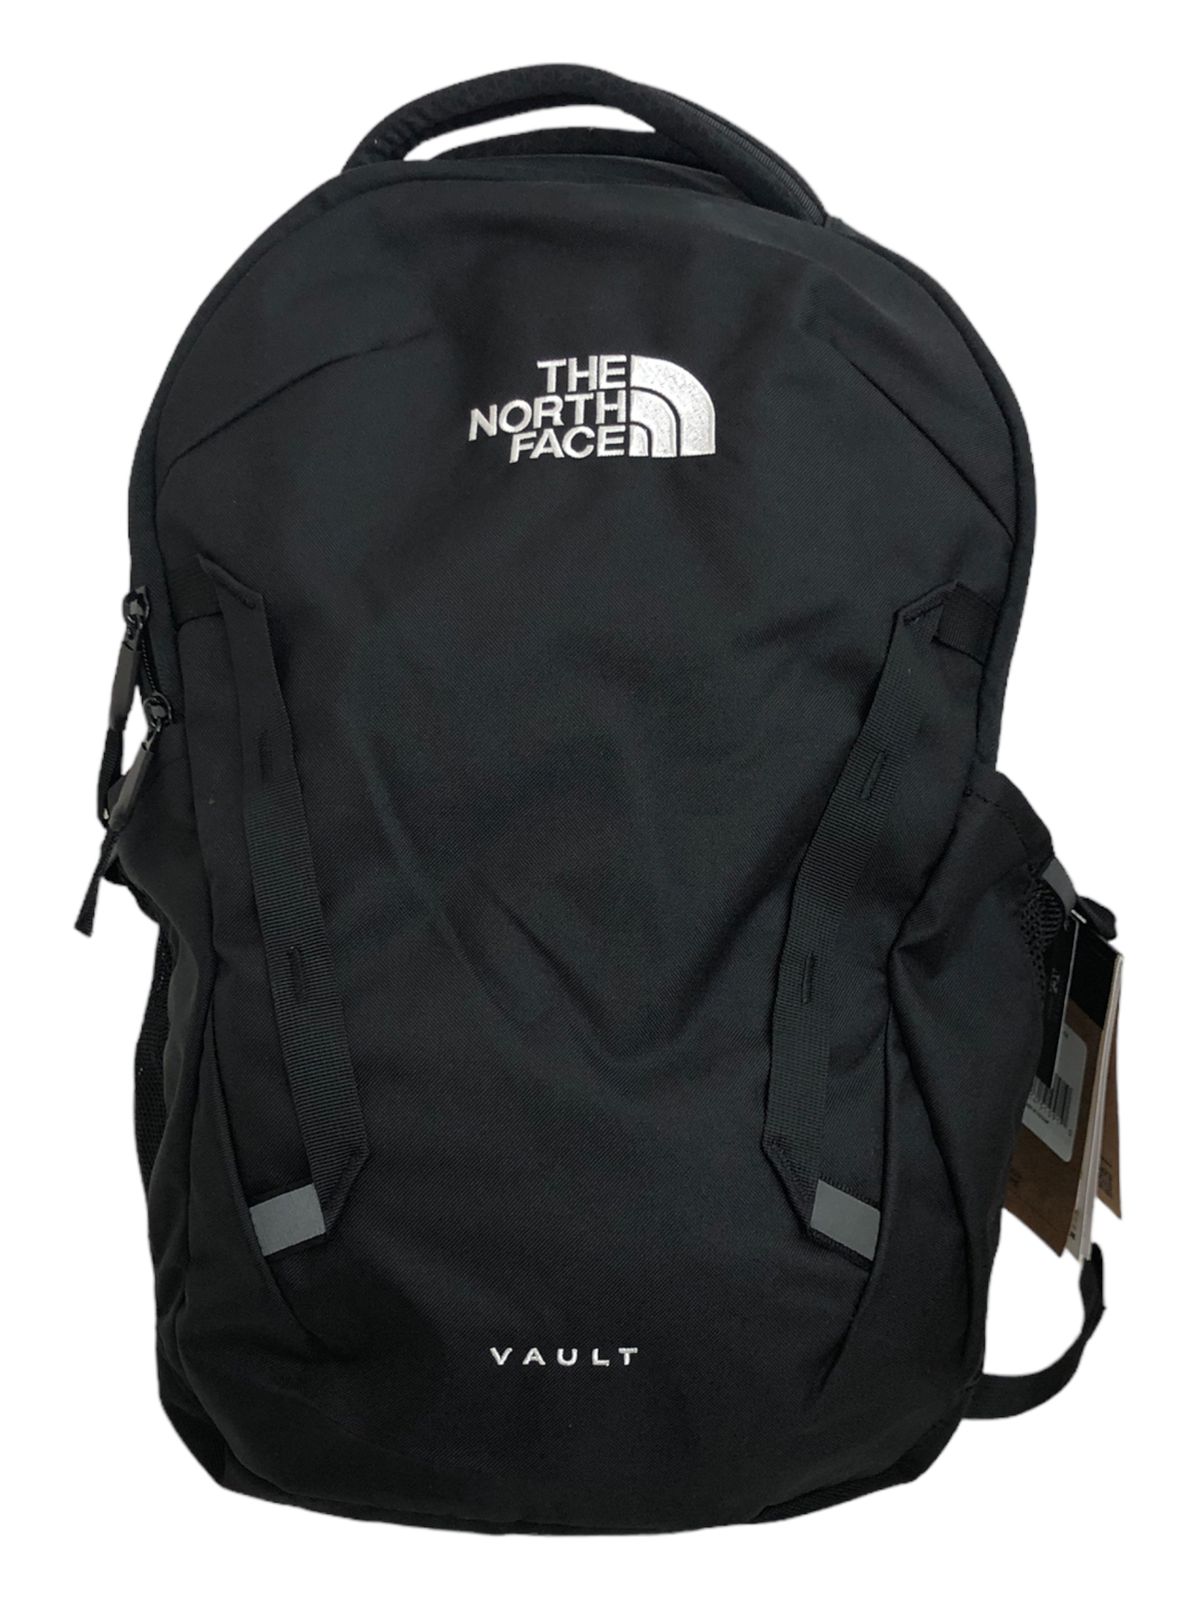 THE NORTH FACE リュックサック ブラック NF0A3VY2 JK3-